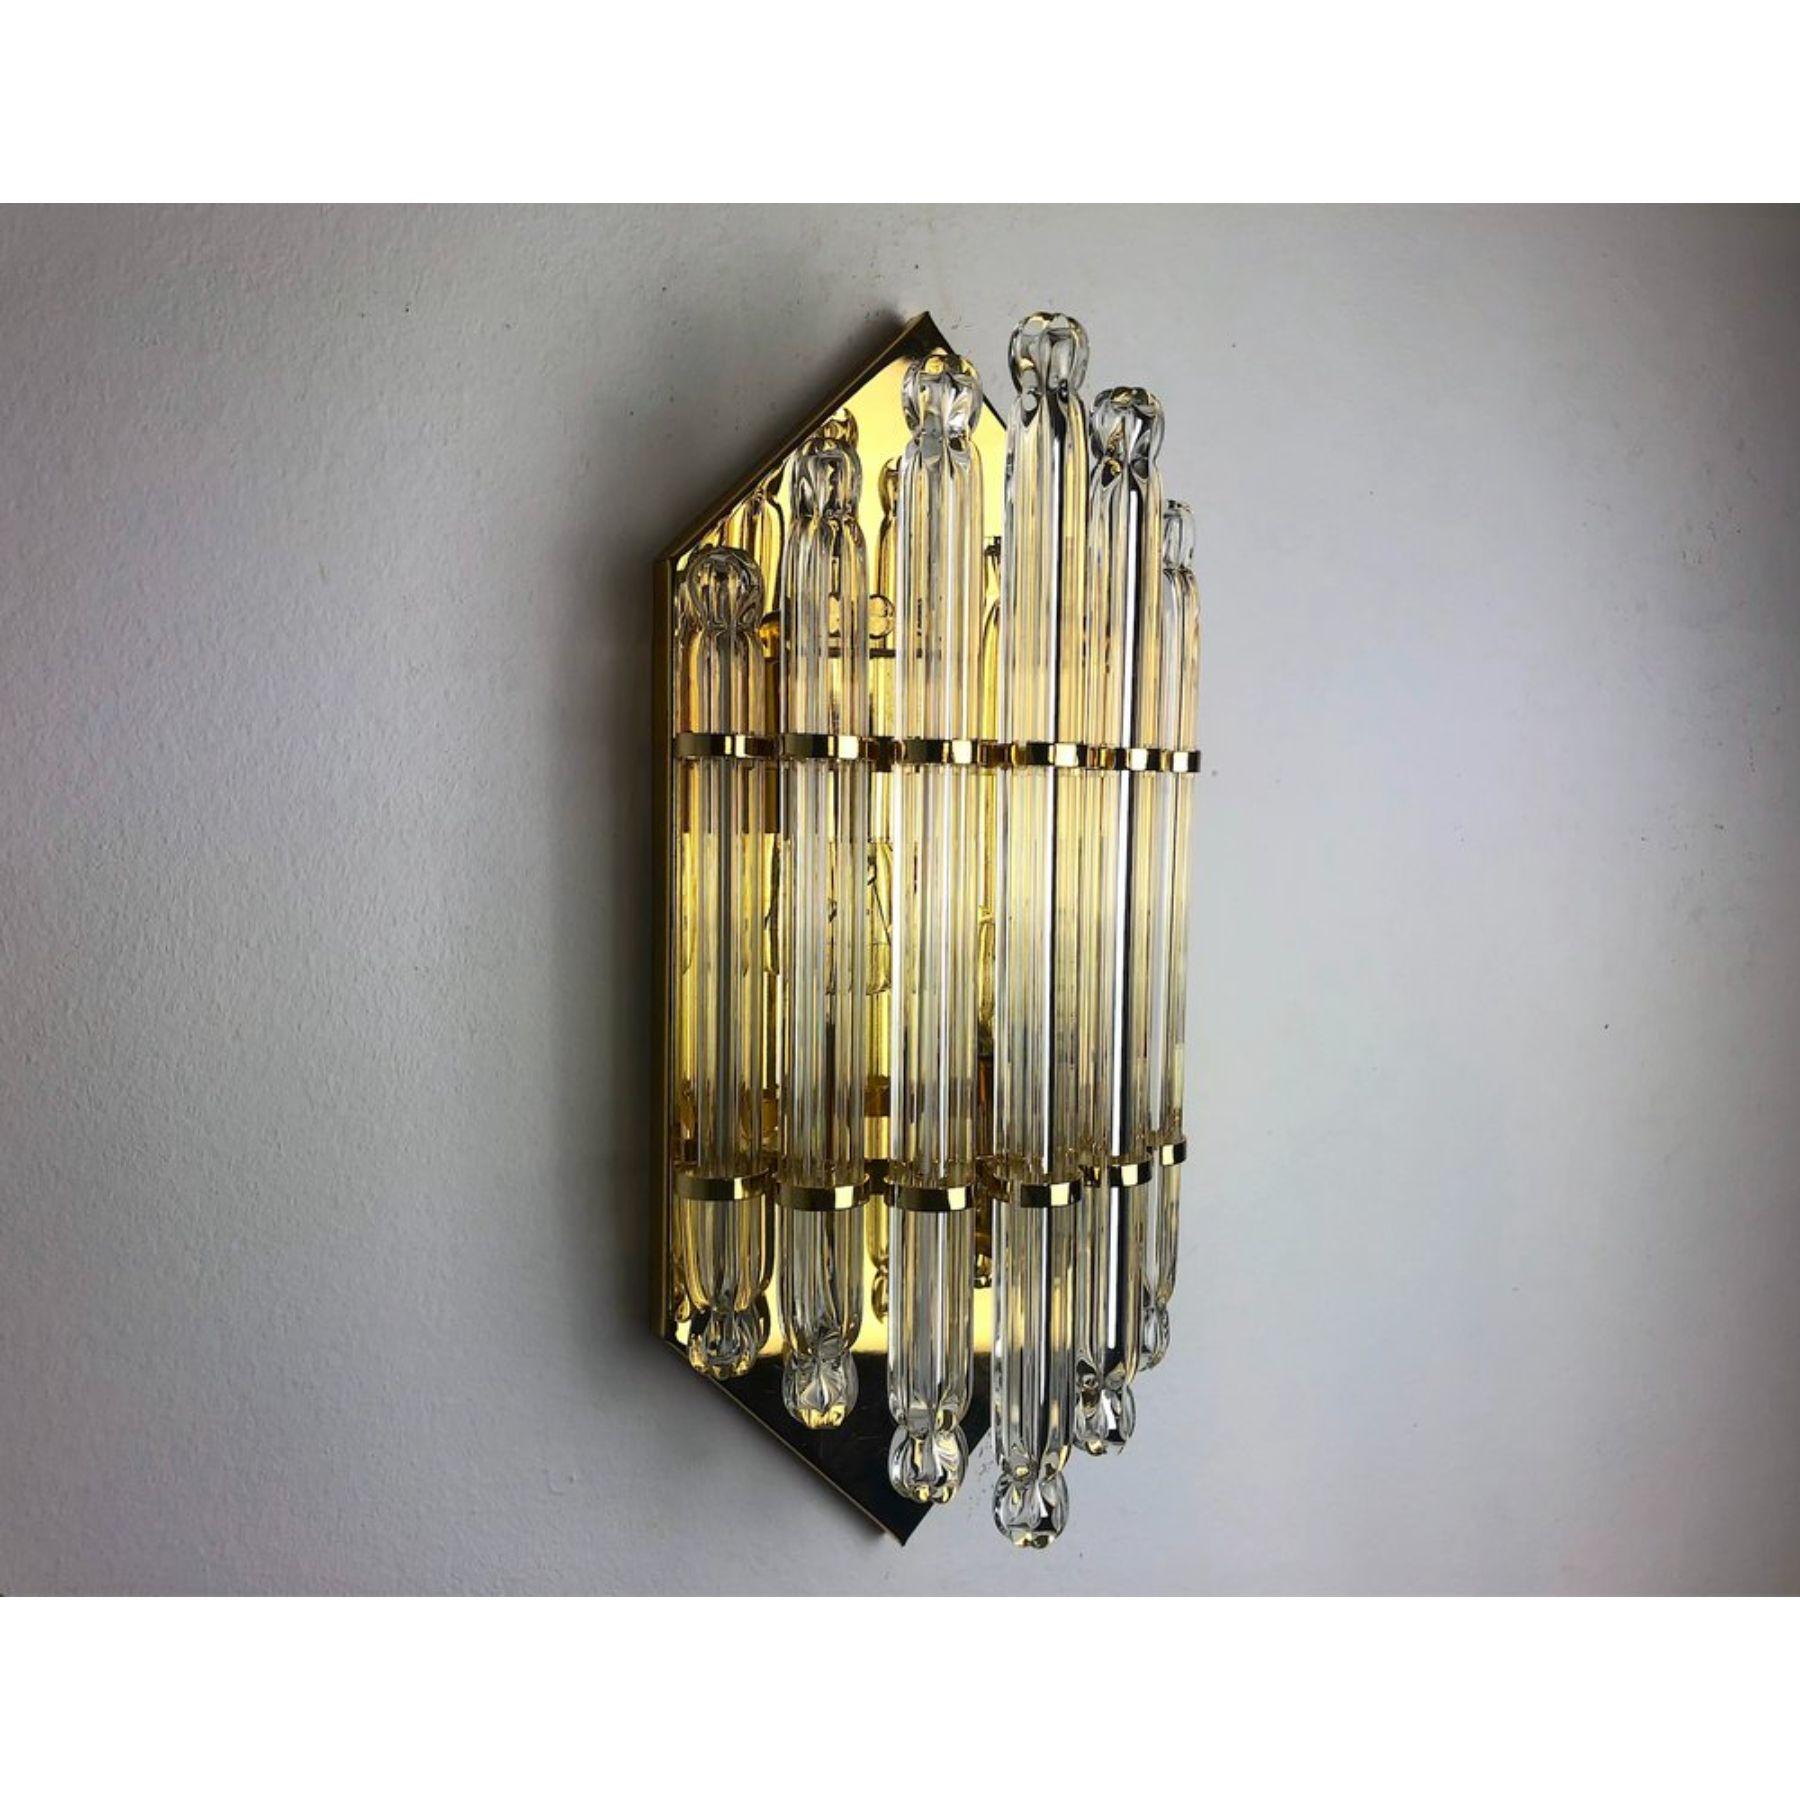 Very beautiful glass wall lamp dating from the 70s, italy. Cut glass and gilded metal structure. Unique object that will illuminate and bring a real design touch to your interior. Verified electricity, time mark relating to the age of the object,